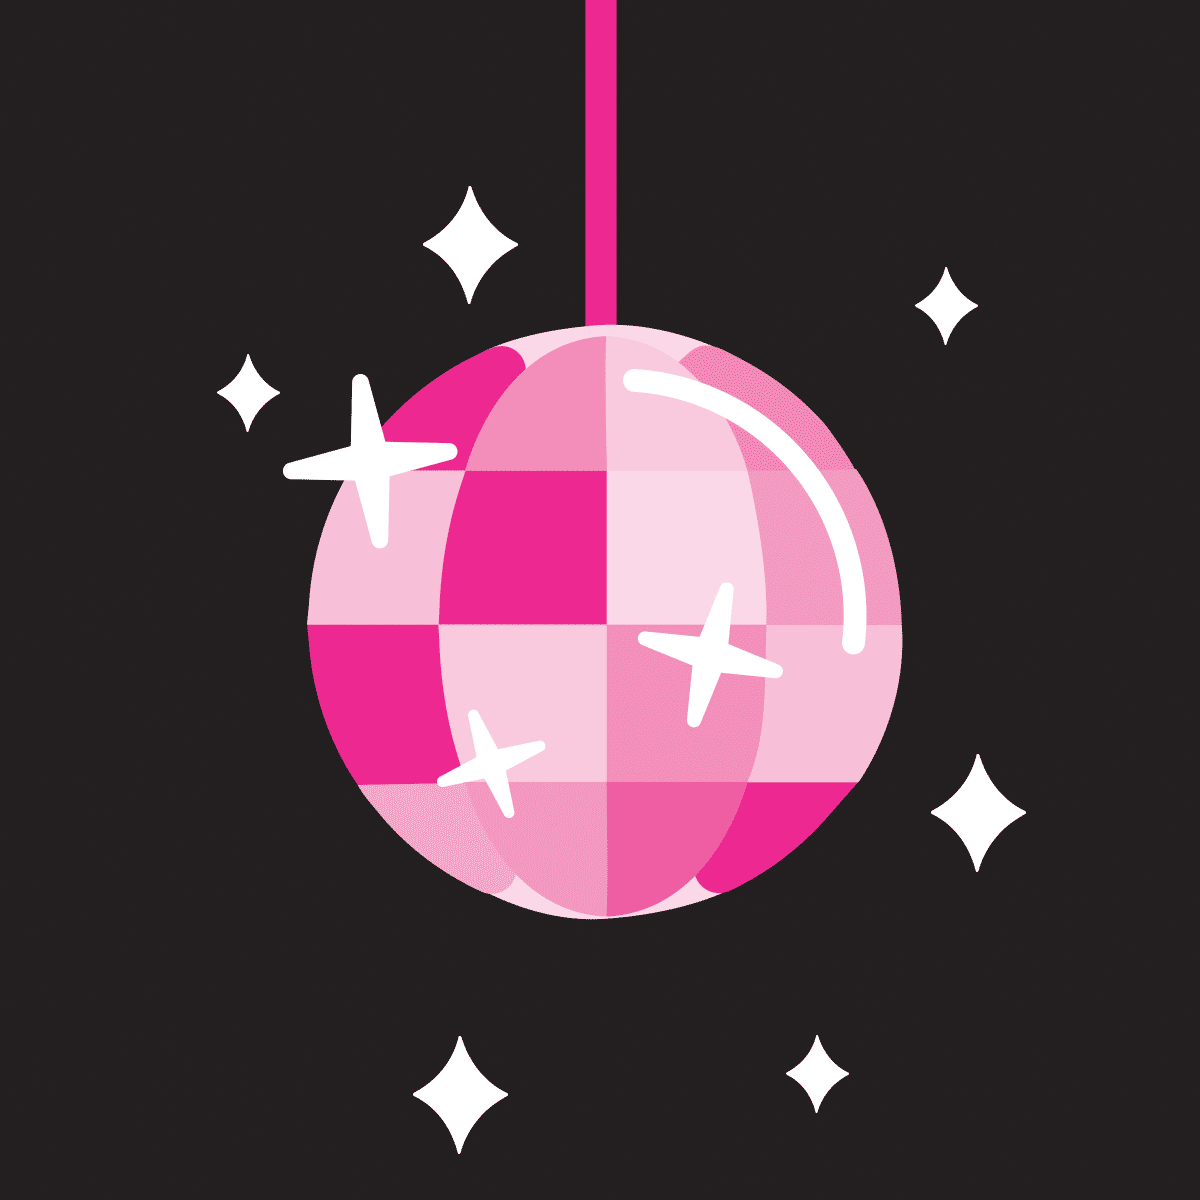 party,disco ball,dj,sparkle,saturday night fever,feel good,disco,spinning,dance,happy,illustration,pink,spin,energy,eighties,dance party,devo,get down,kristin carder,jong woon,80s